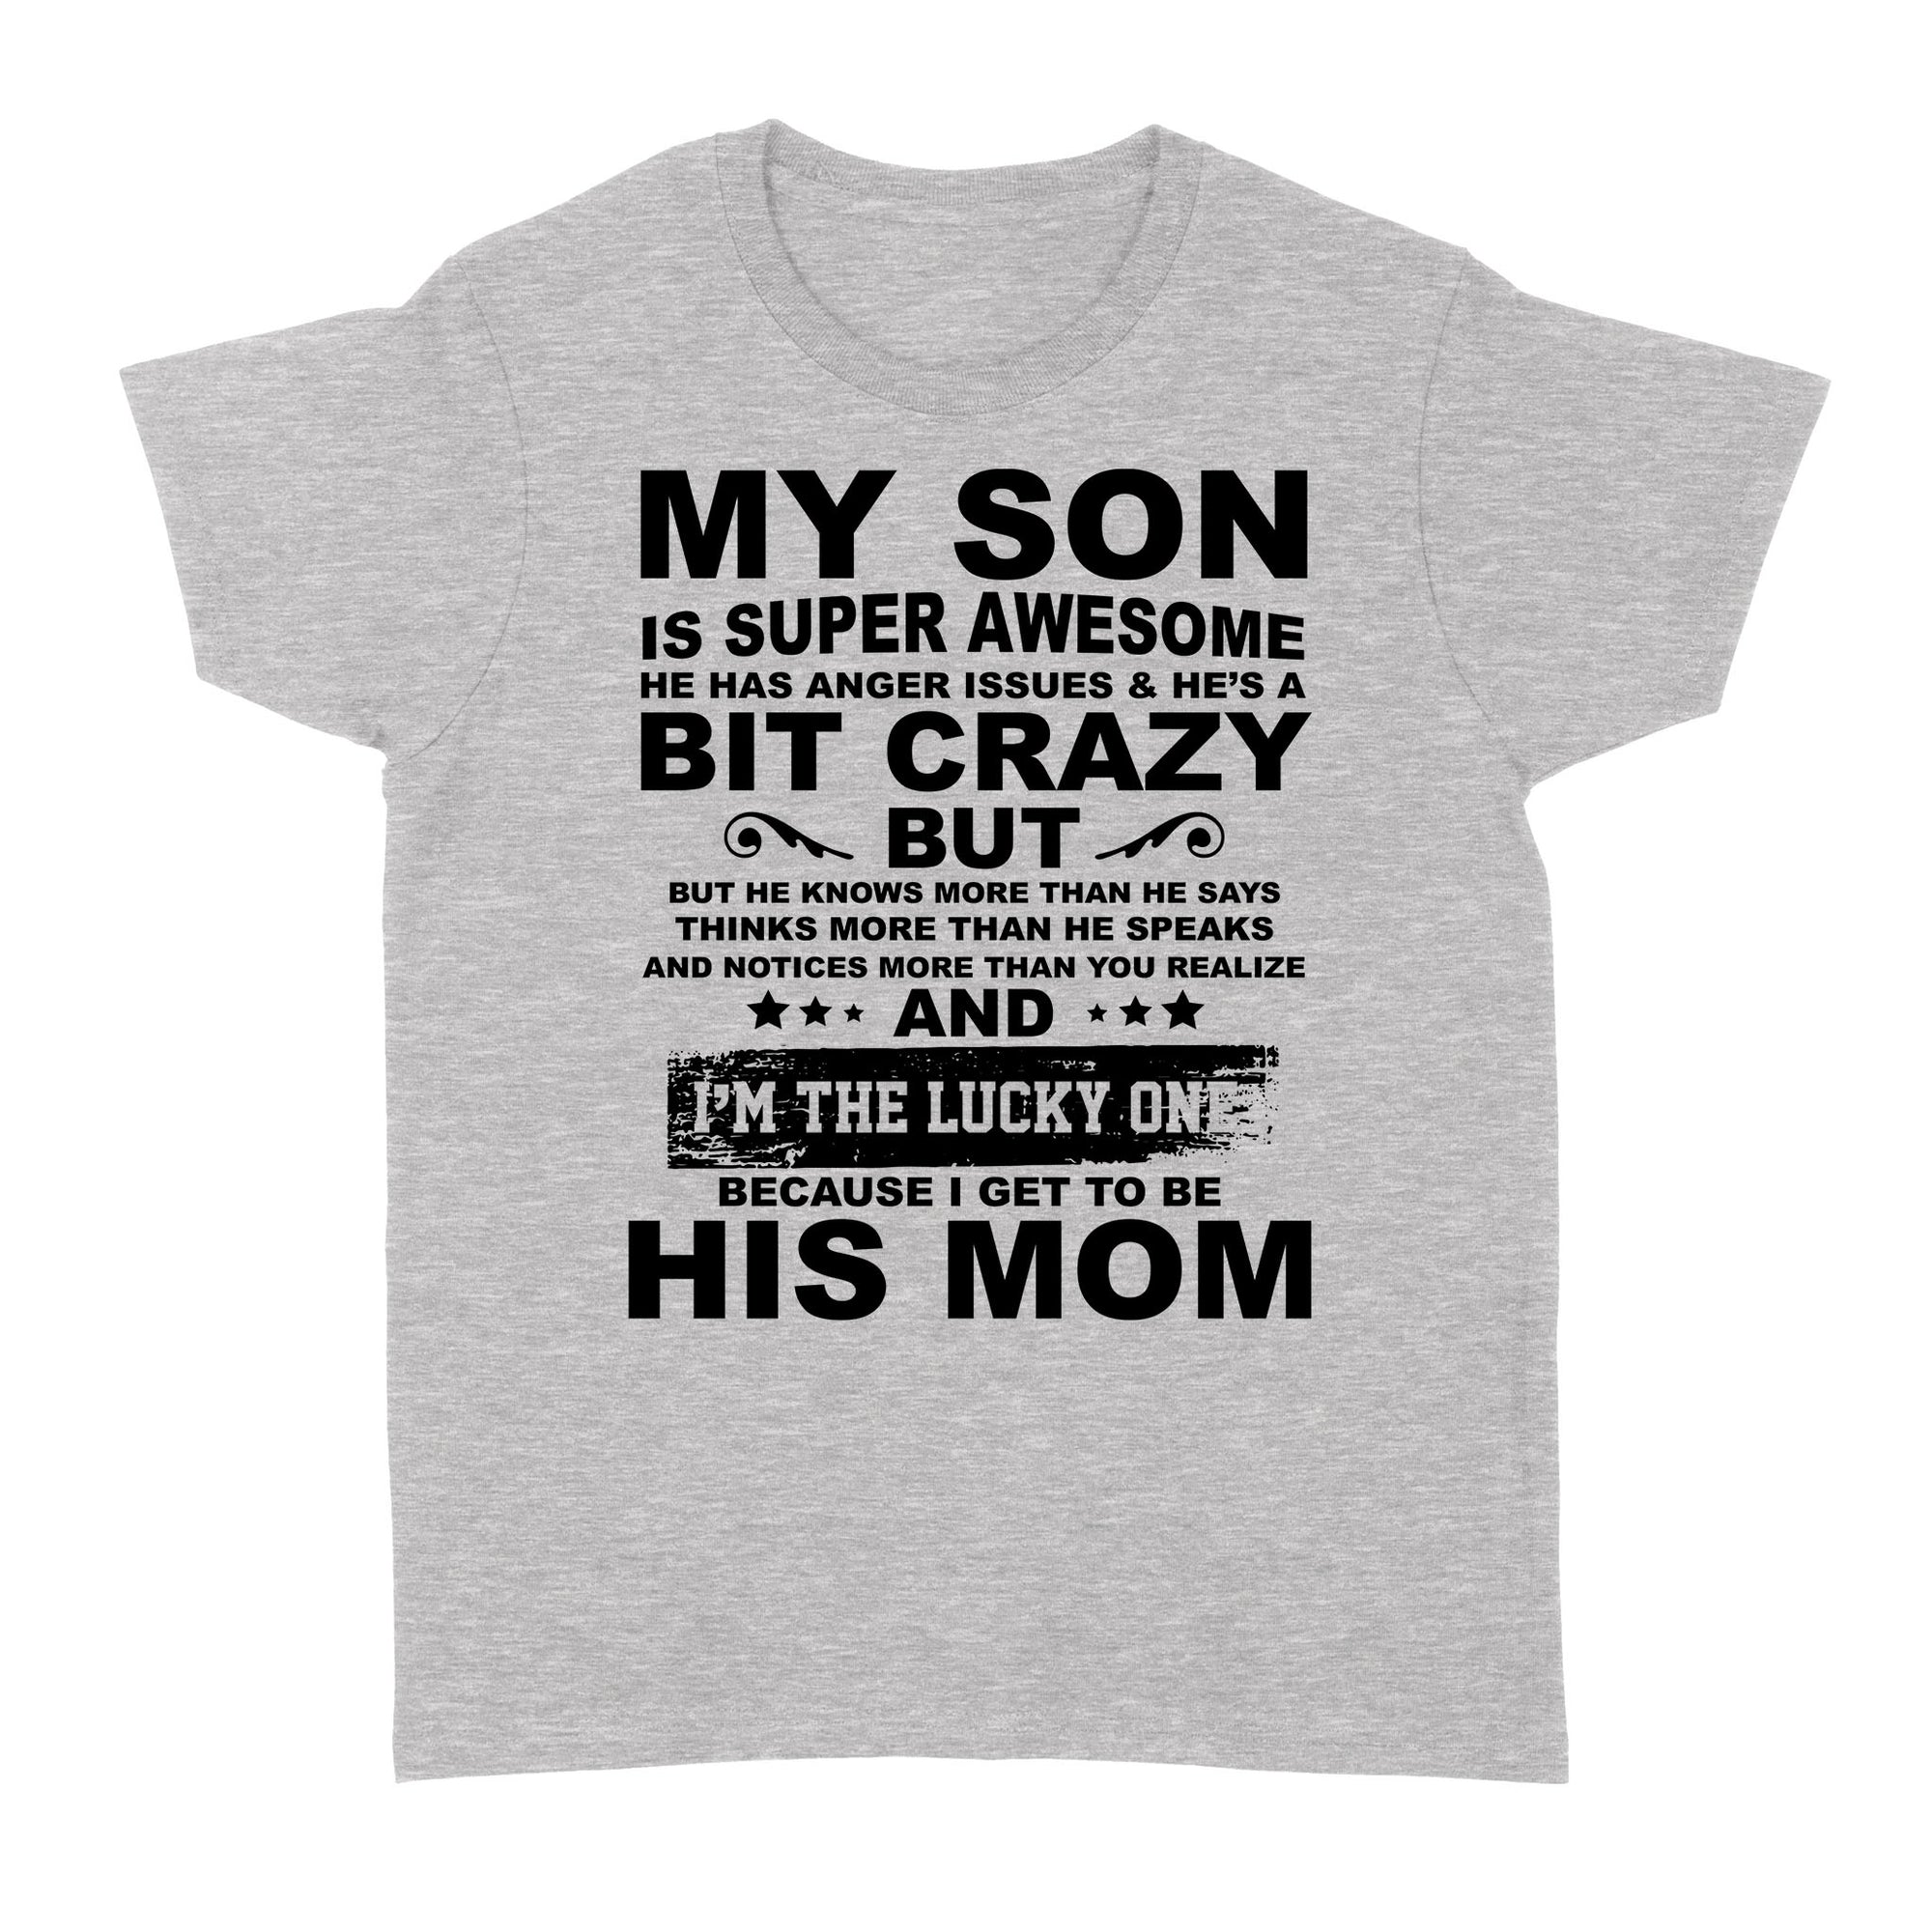 My Son Is Super Awesome He Has Anger Issues He's A Bit Crazy I'm Lucky One Funny Gift Ideas for Mom from Son Christmas - Standard Women's T-shirt